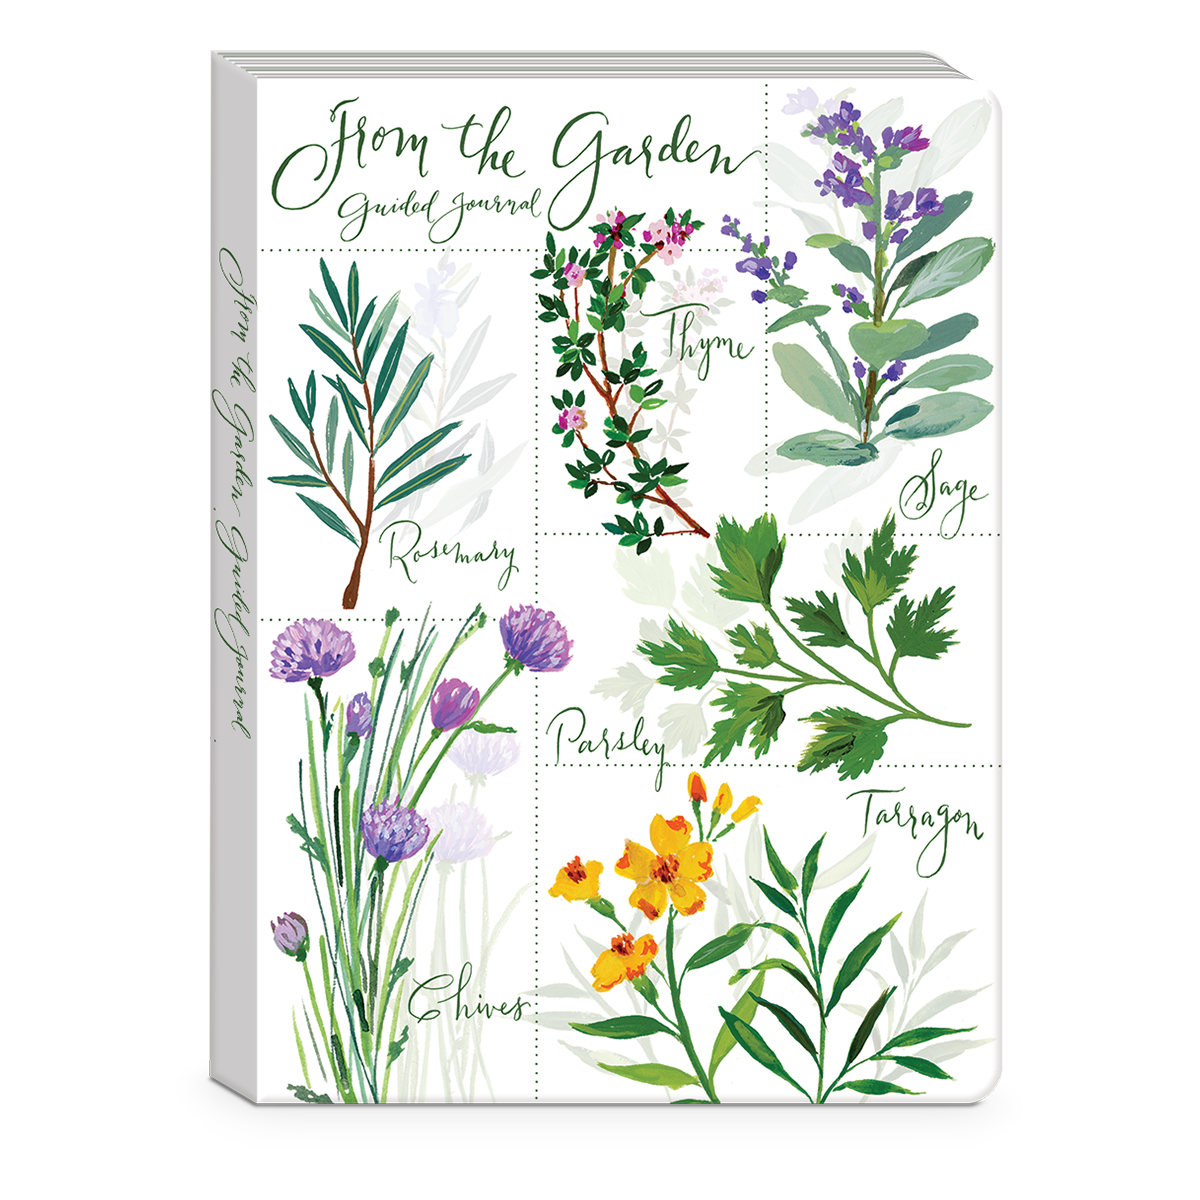 Herb Garden Guided Journal Product